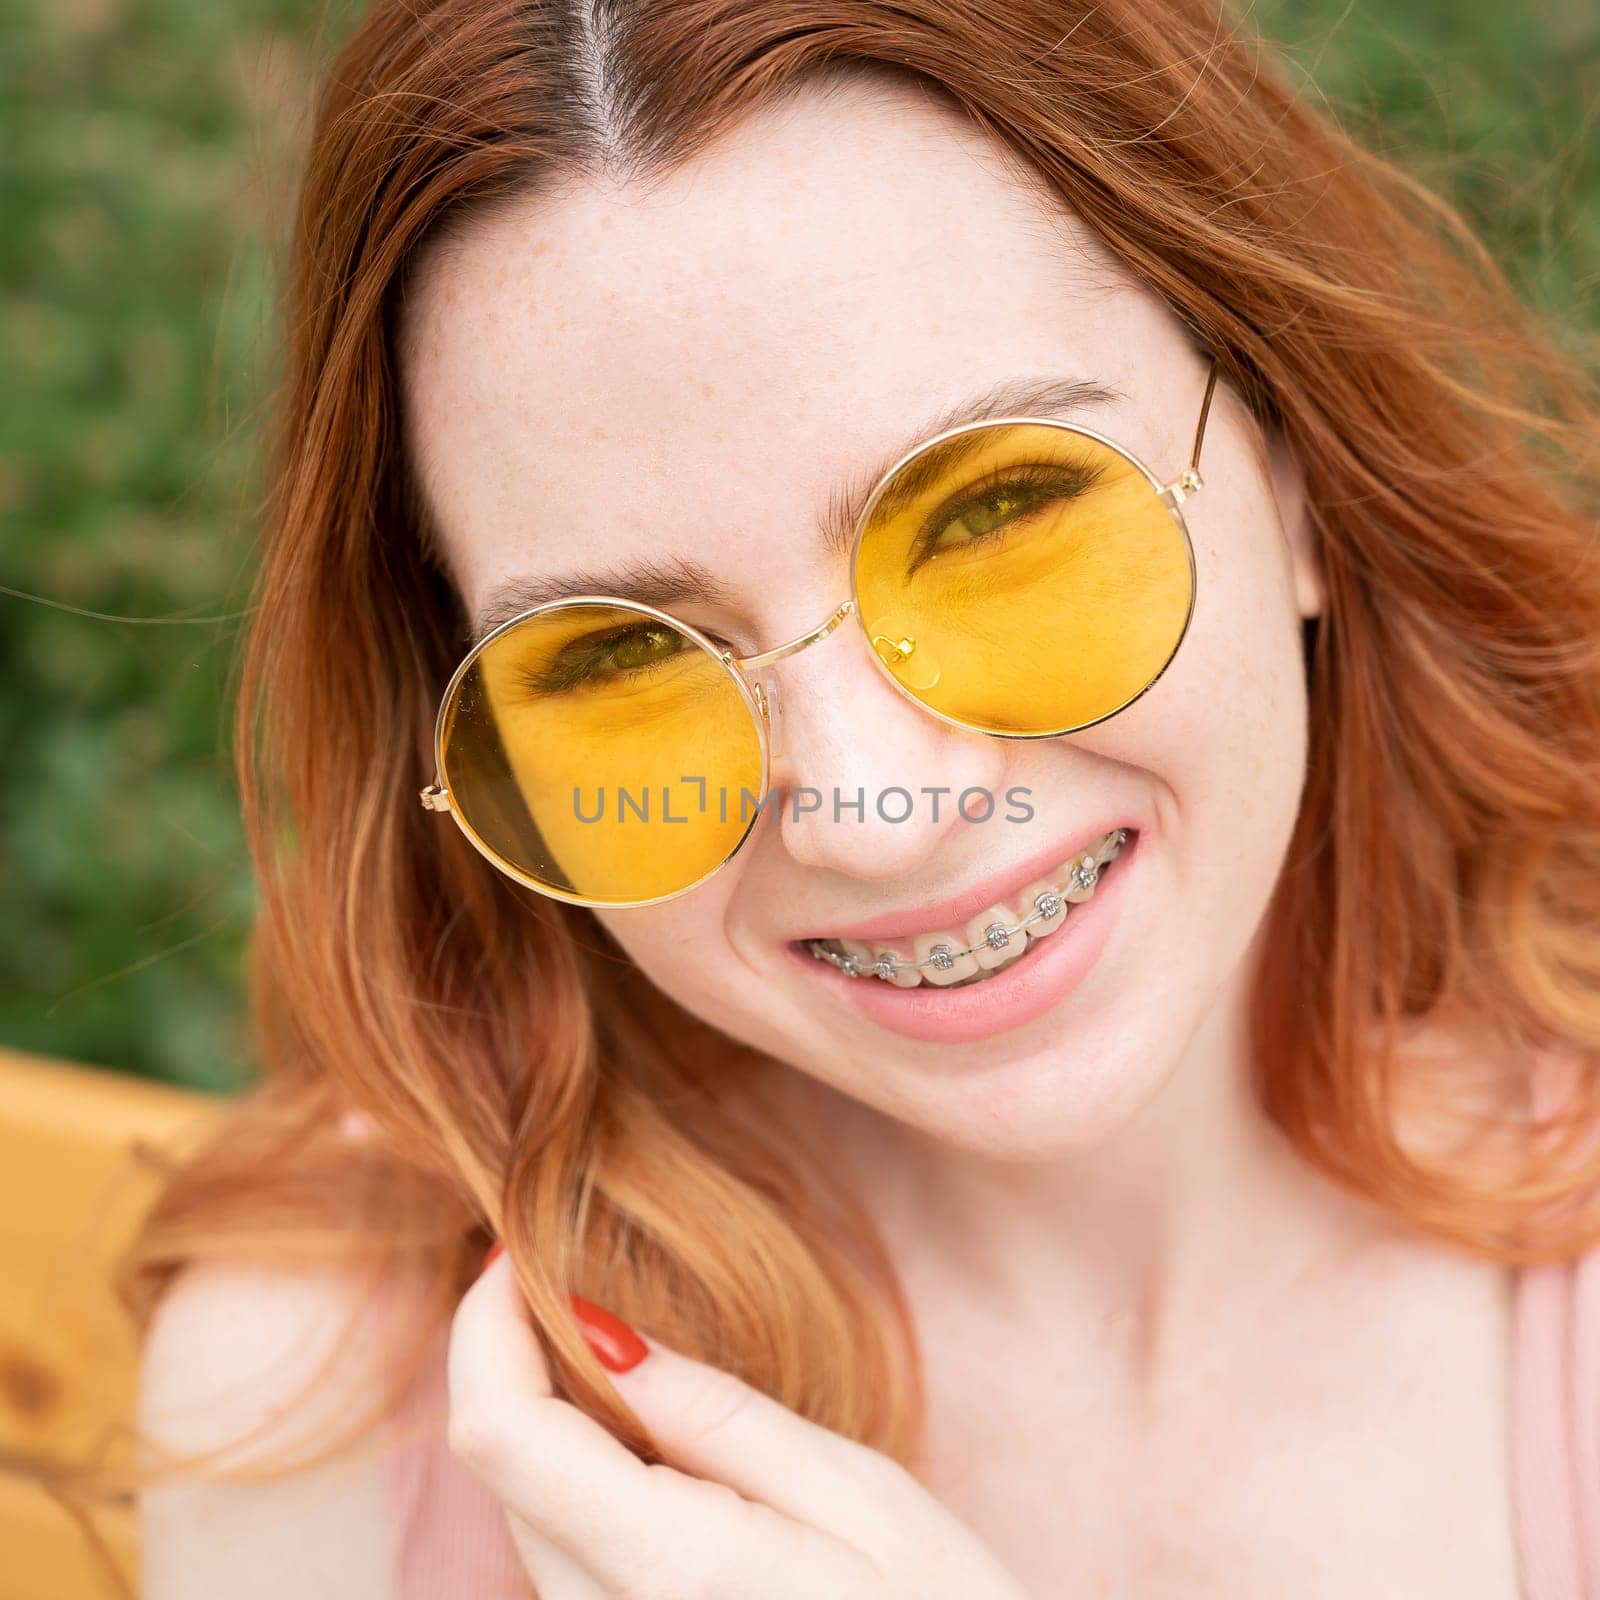 Beautiful young woman in yellow sunglasses smiling showing off braces on her teeth. by mrwed54